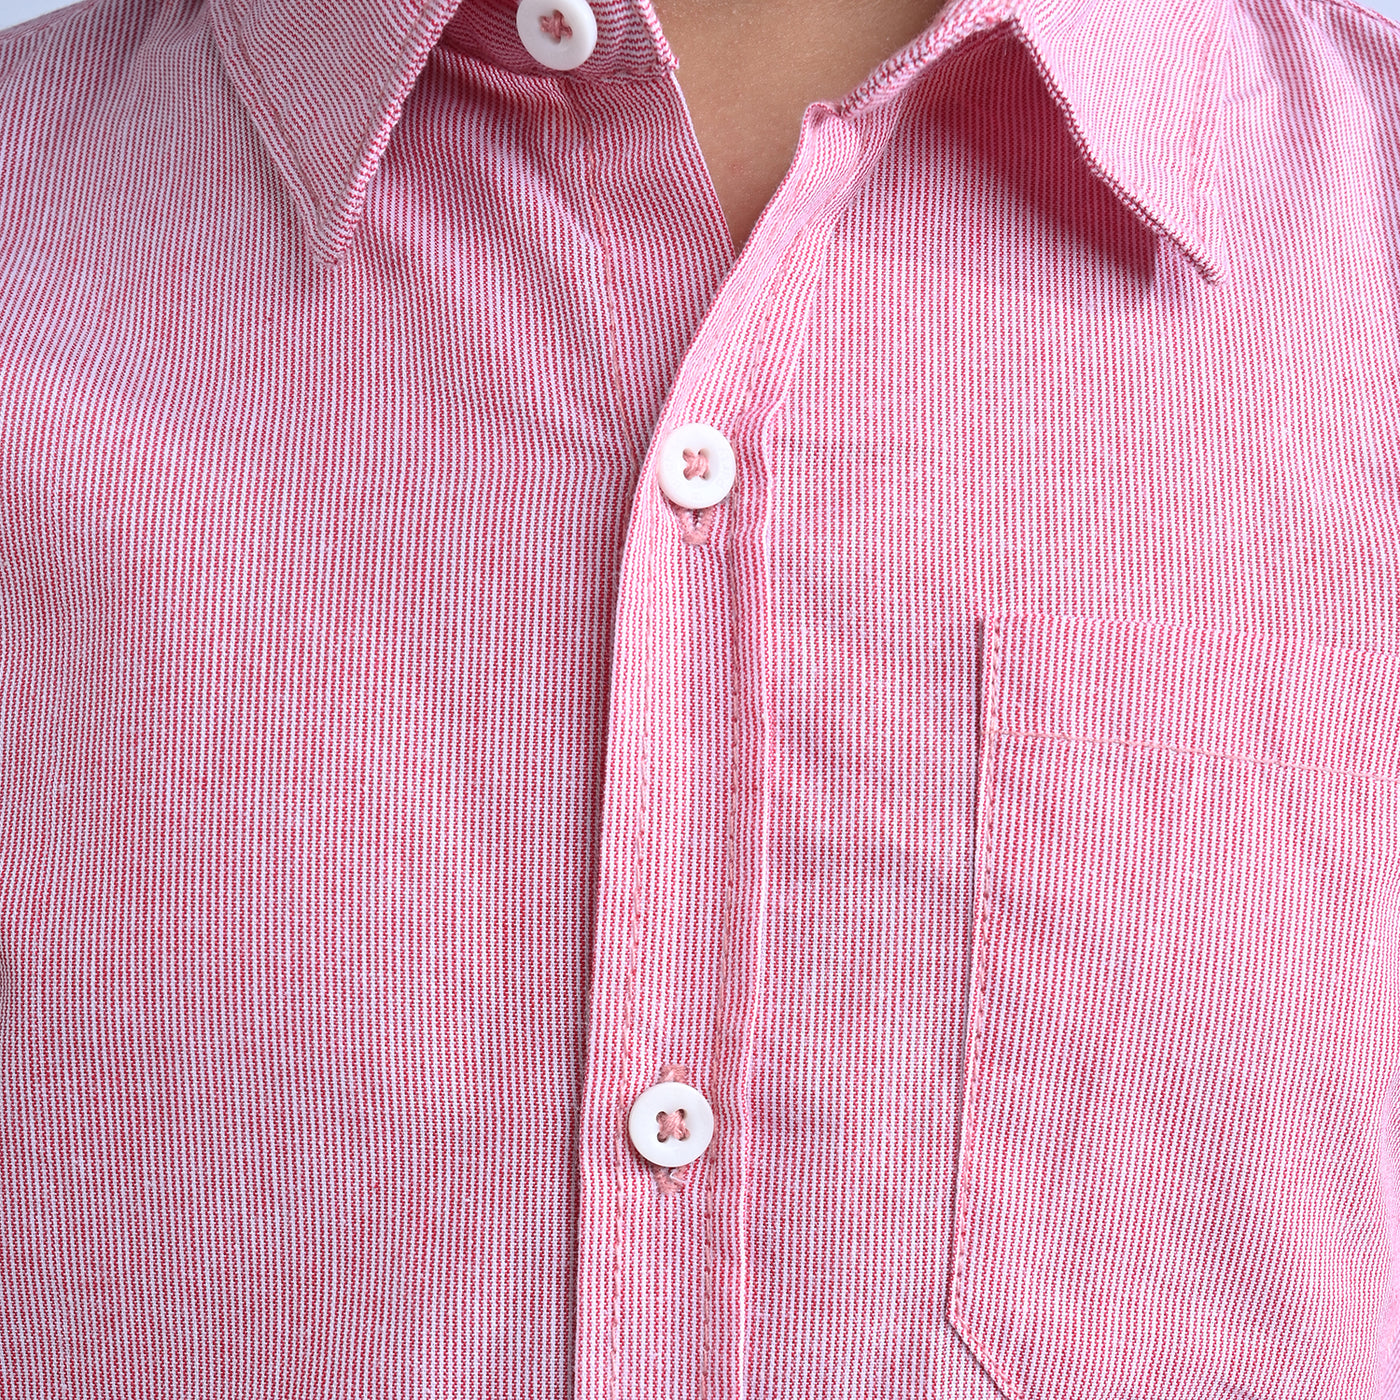 Boys Cotton Casual F/S Shirt- Pink